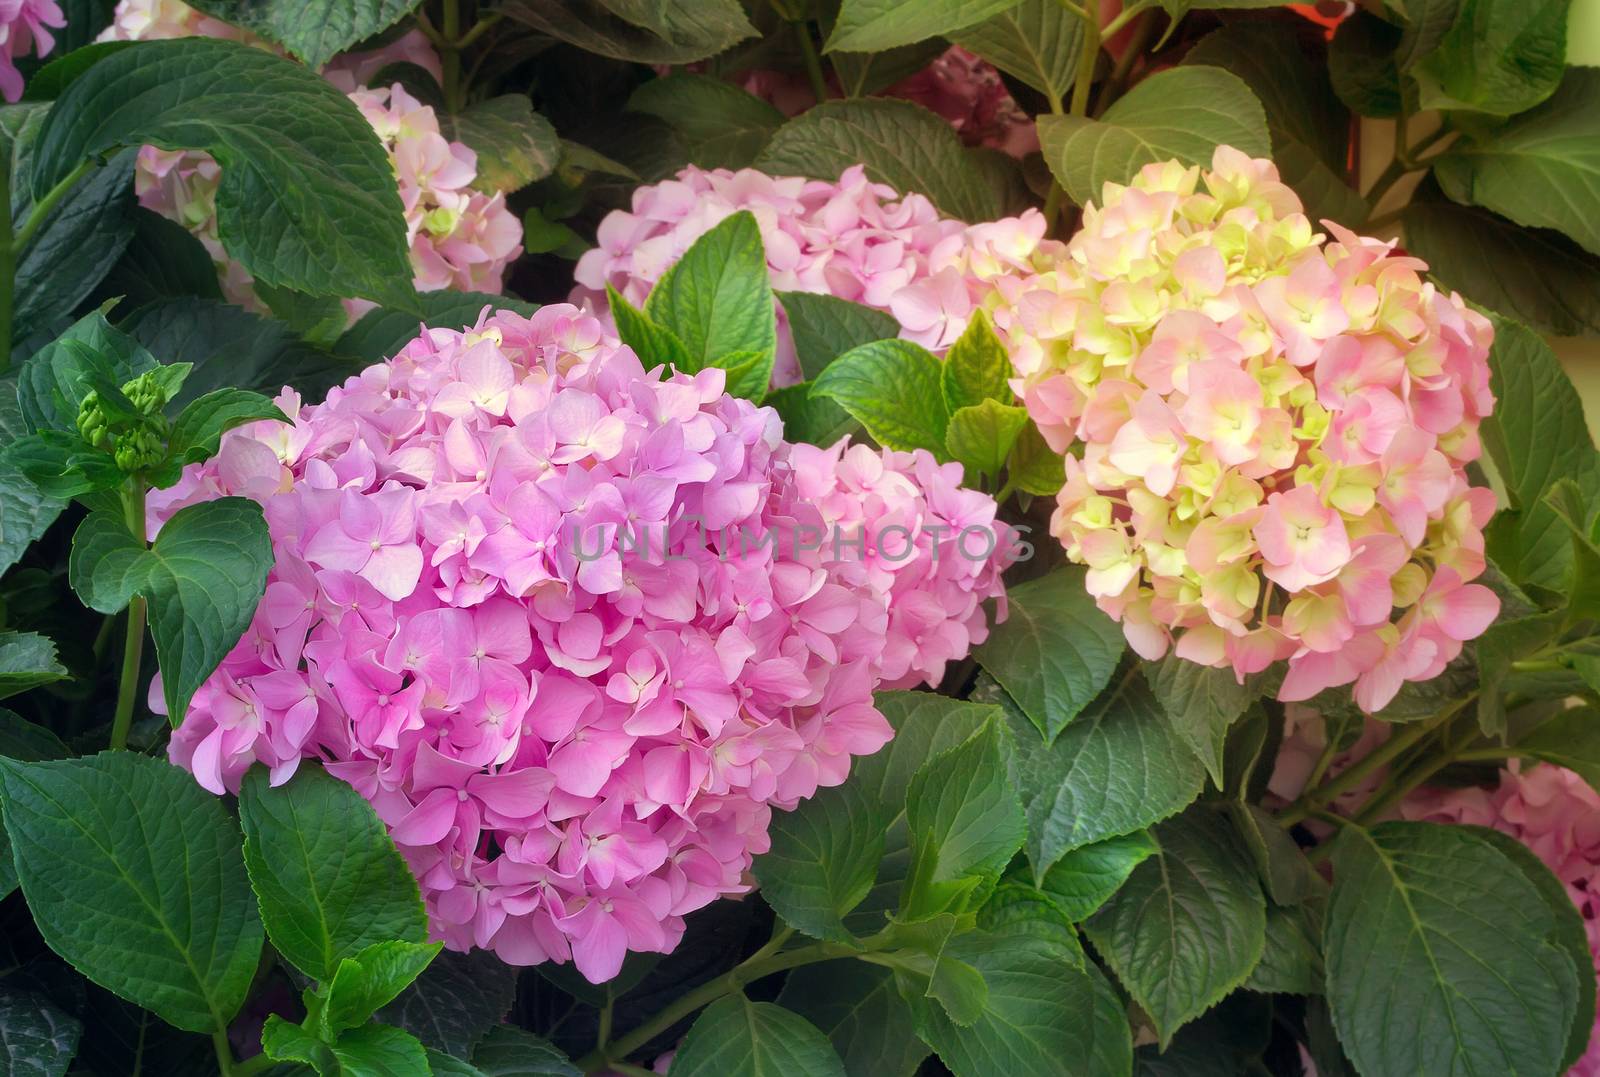 Large inflorescences flowering hydrangeas and green leaves.